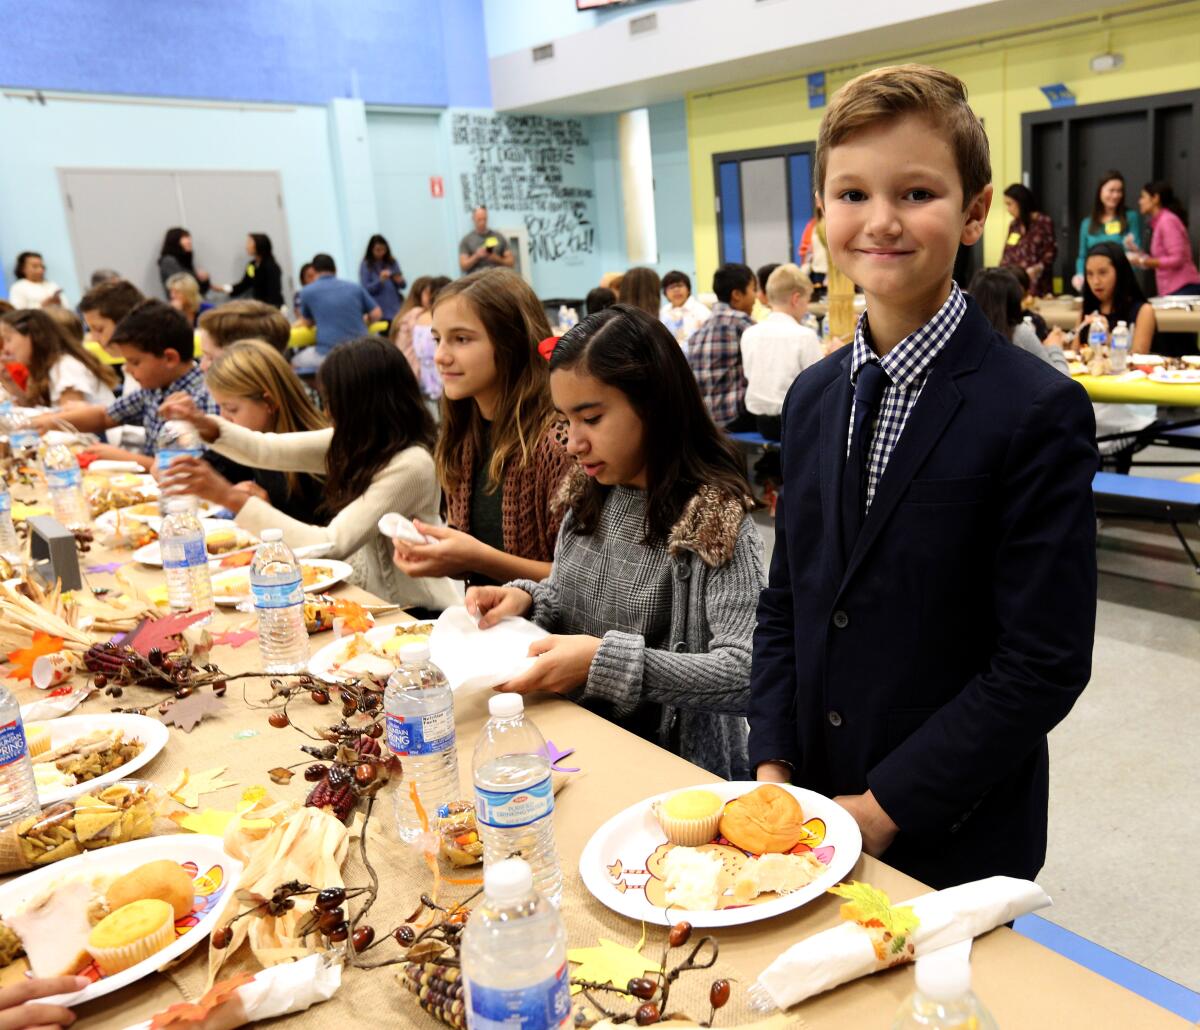 La Cañada Elementary School fifth-grader Miles Worster dressed up not in costume but in a jacket and tie for the school's annual Fifth-Grade Feast. Students and parents used to dress as pilgrims and Native Americans, but the tradition was changed after the school received complaints about perceived cultural insensitivity.